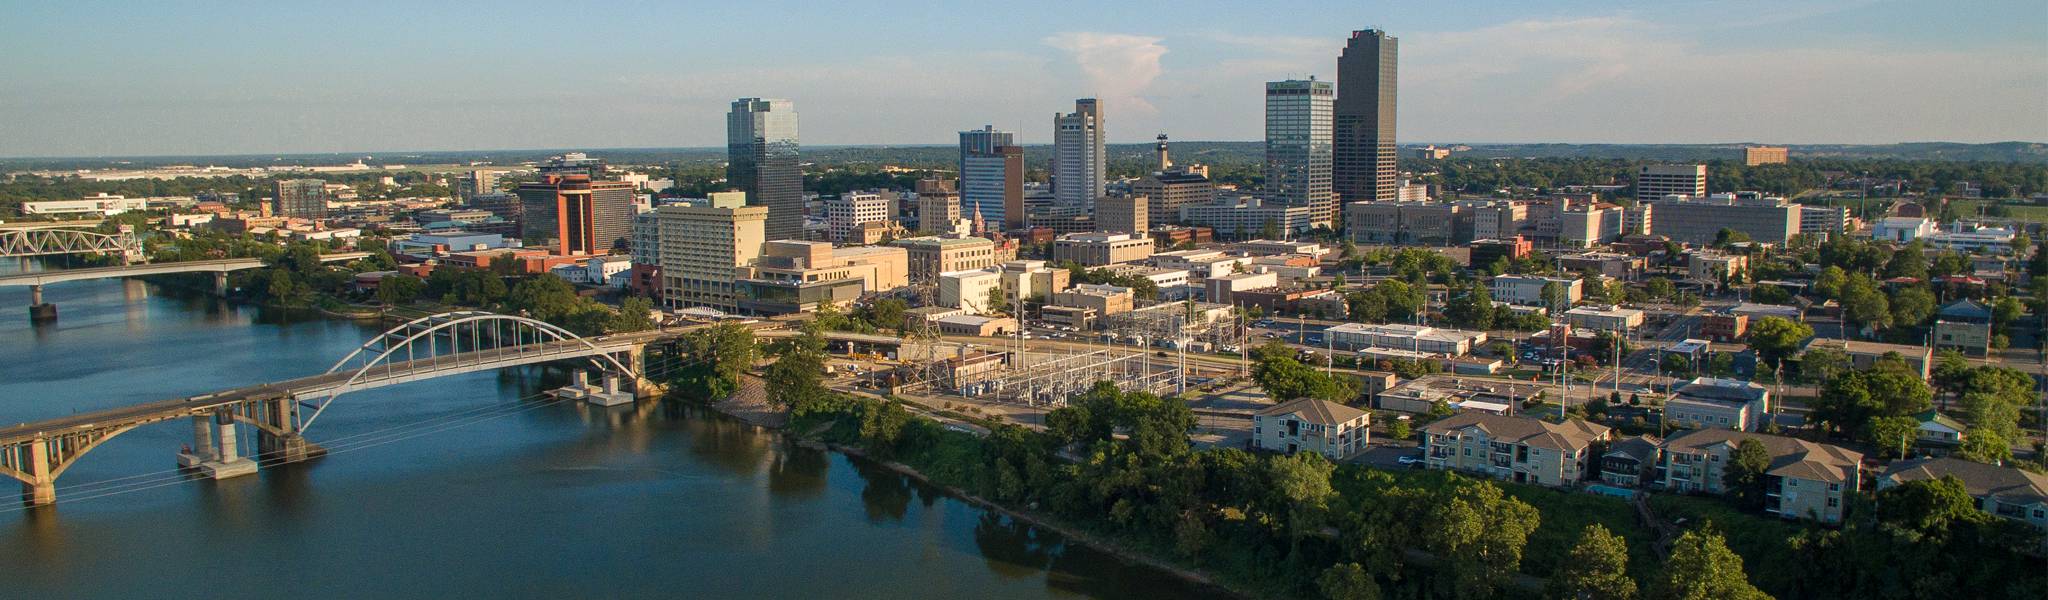 Little Rock City States HD Wallpaper and Photo